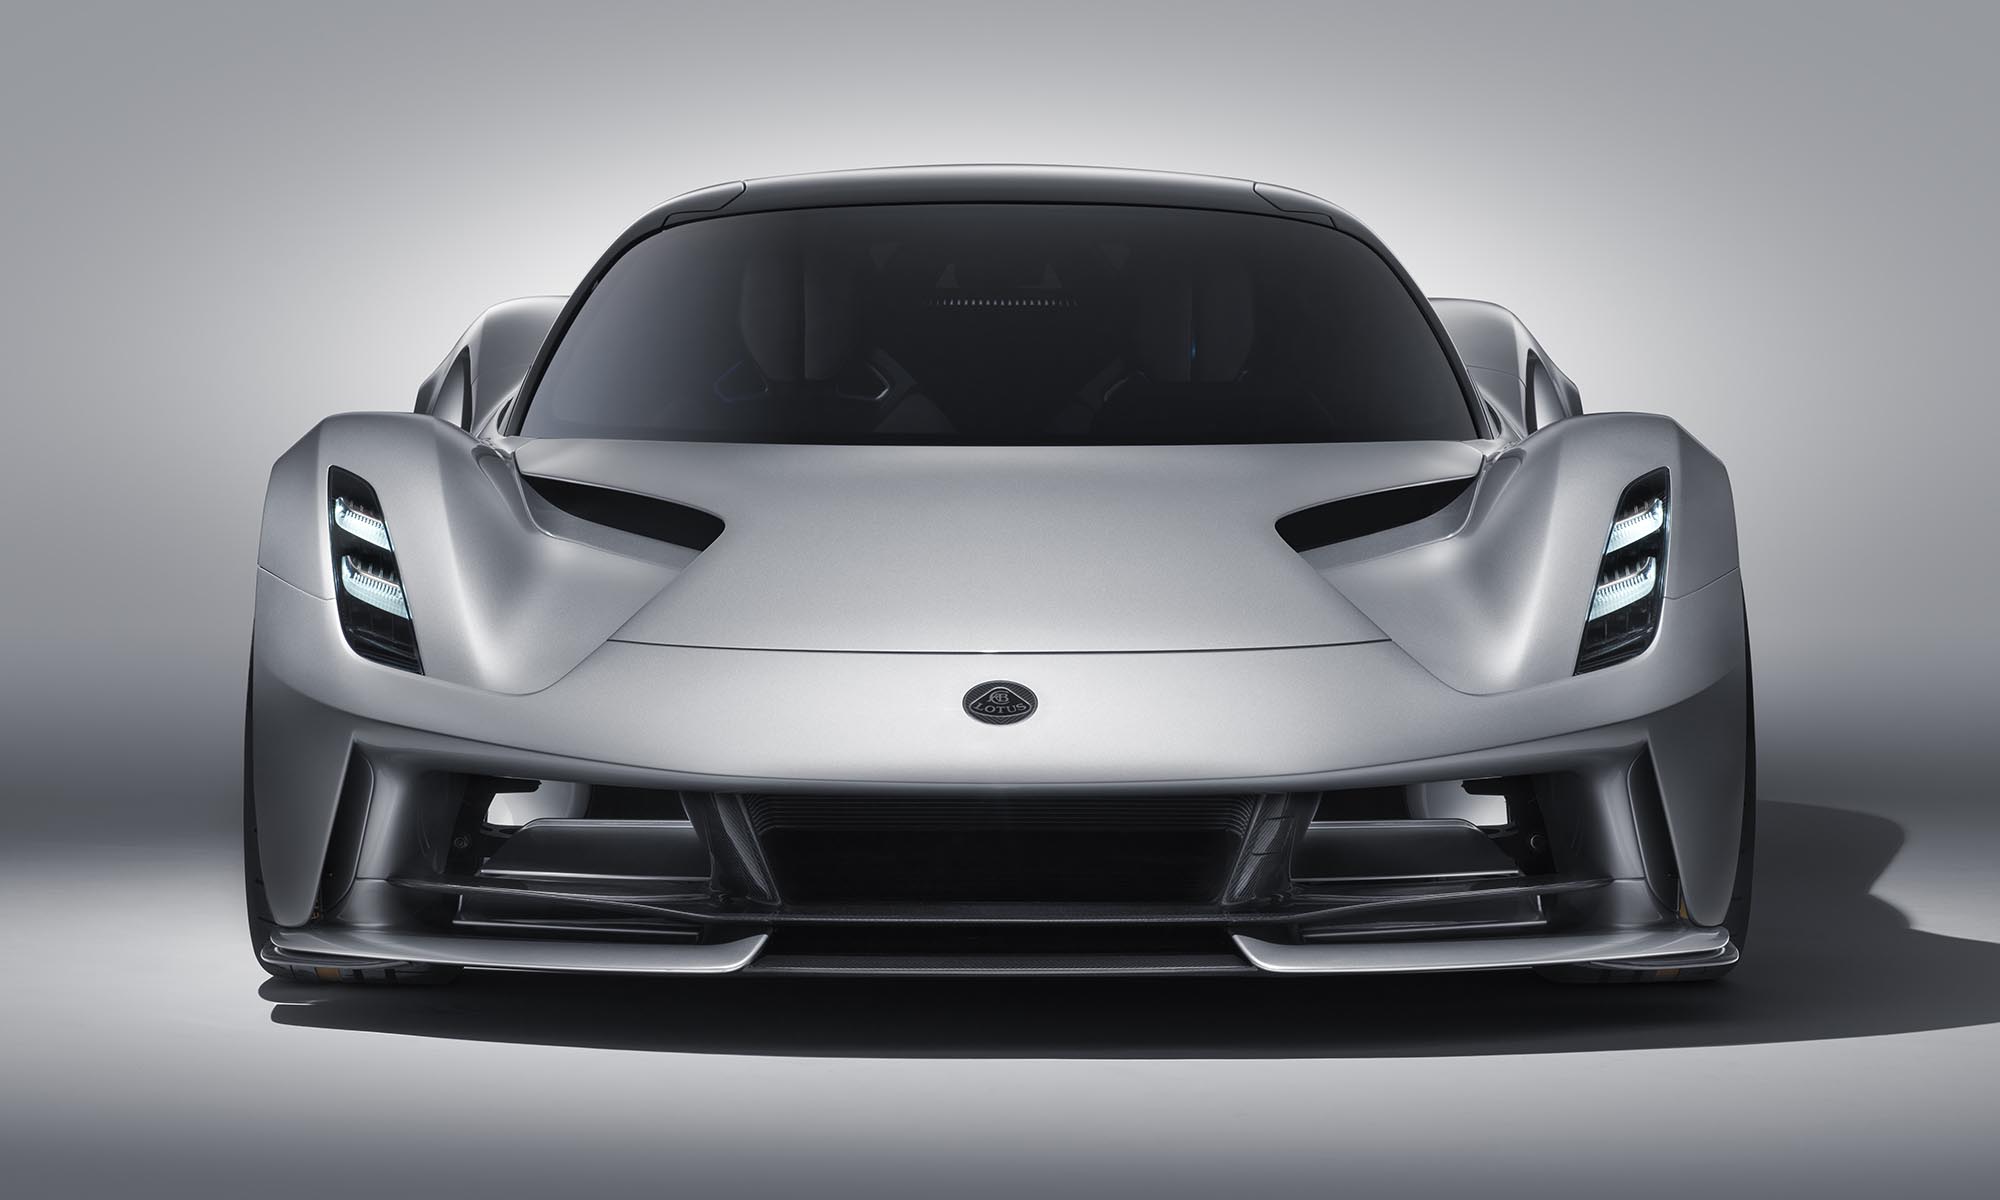 Electric British hypercar, Lotus, Evija, fastest cars, top car, electric car, lightweight luxury, luxury car, masterpiece, Forged by British engineering, created for the drivers, Pure beauty, Elegant simplicity, carmaker, Chinese automotive group Geely, electric hypercar, hypercar, four electric motors, 1972-horsepower, 